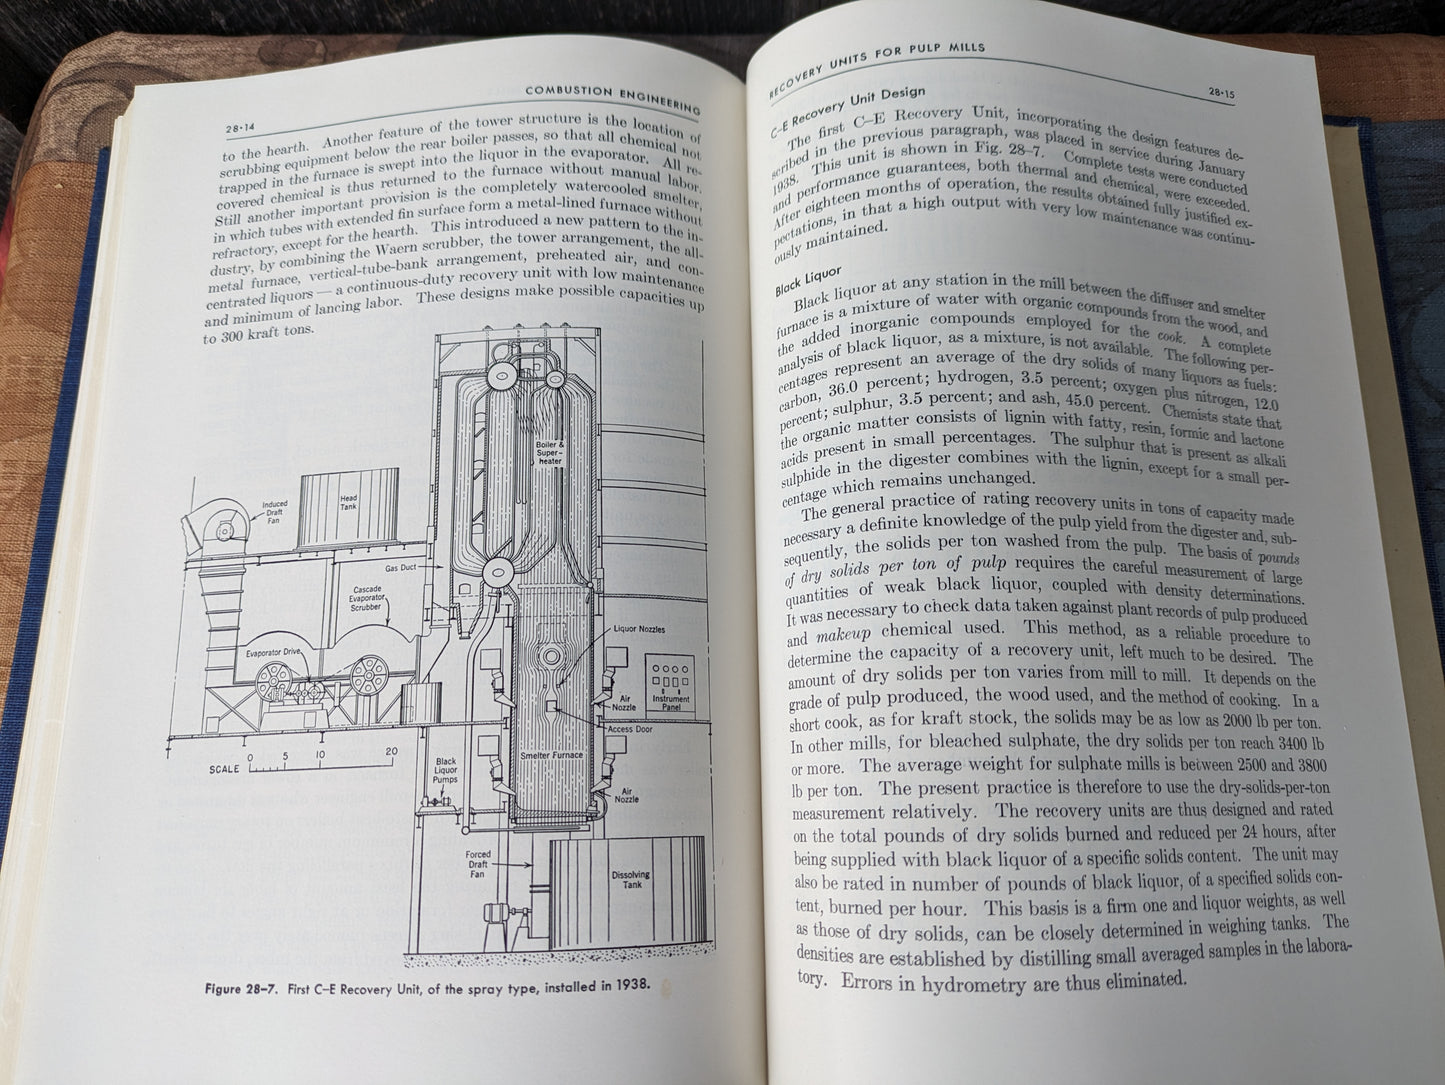 Combustion Engineering, A reference Book on Fuel Burning and Steam Generation, Otto de Lorenzi, 1950.